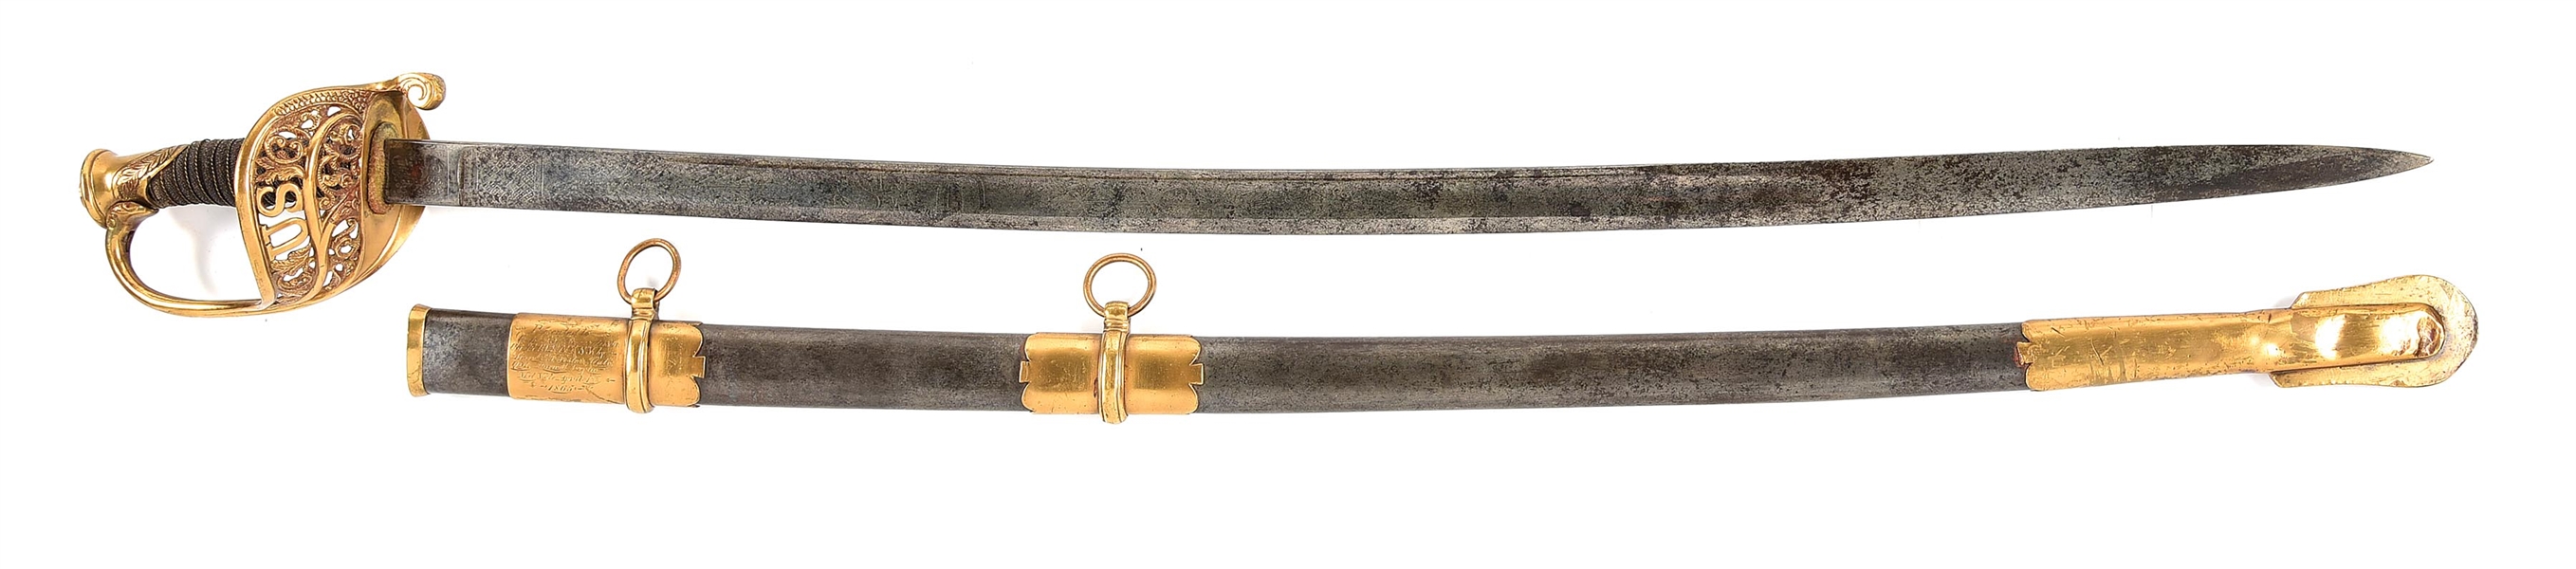 PRESENTATION GRADE MODEL 1850 STAFF AND FIELD OFFICER’S SWORD PRESENTED TO CAPTAIN STEPHEN H. BOGARDUS JR., TOOK MILLER’S CORNFIELD, WIA AT ANTIETAM WITH THE PURNELL LEGION.